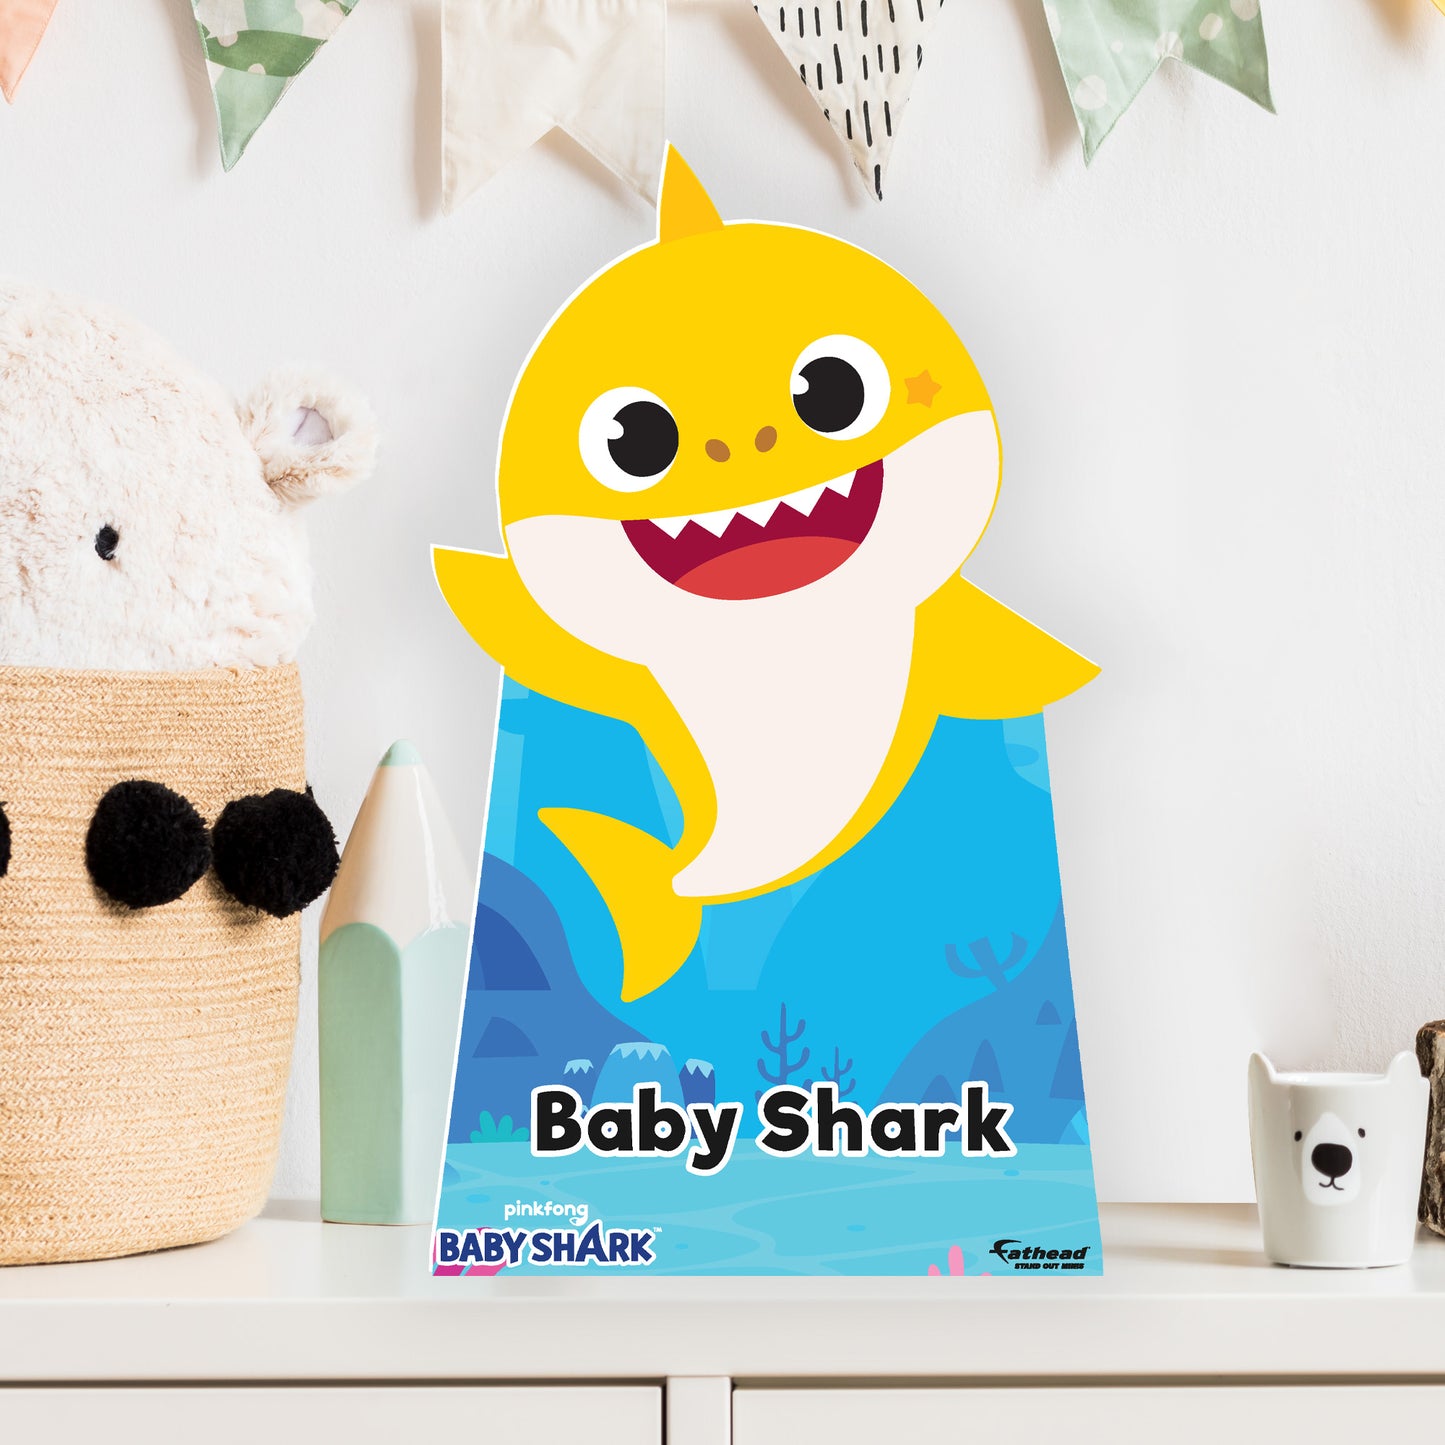 Baby Shark: Baby Shark Mini   Cardstock Cutout  - Officially Licensed Nickelodeon    Stand Out